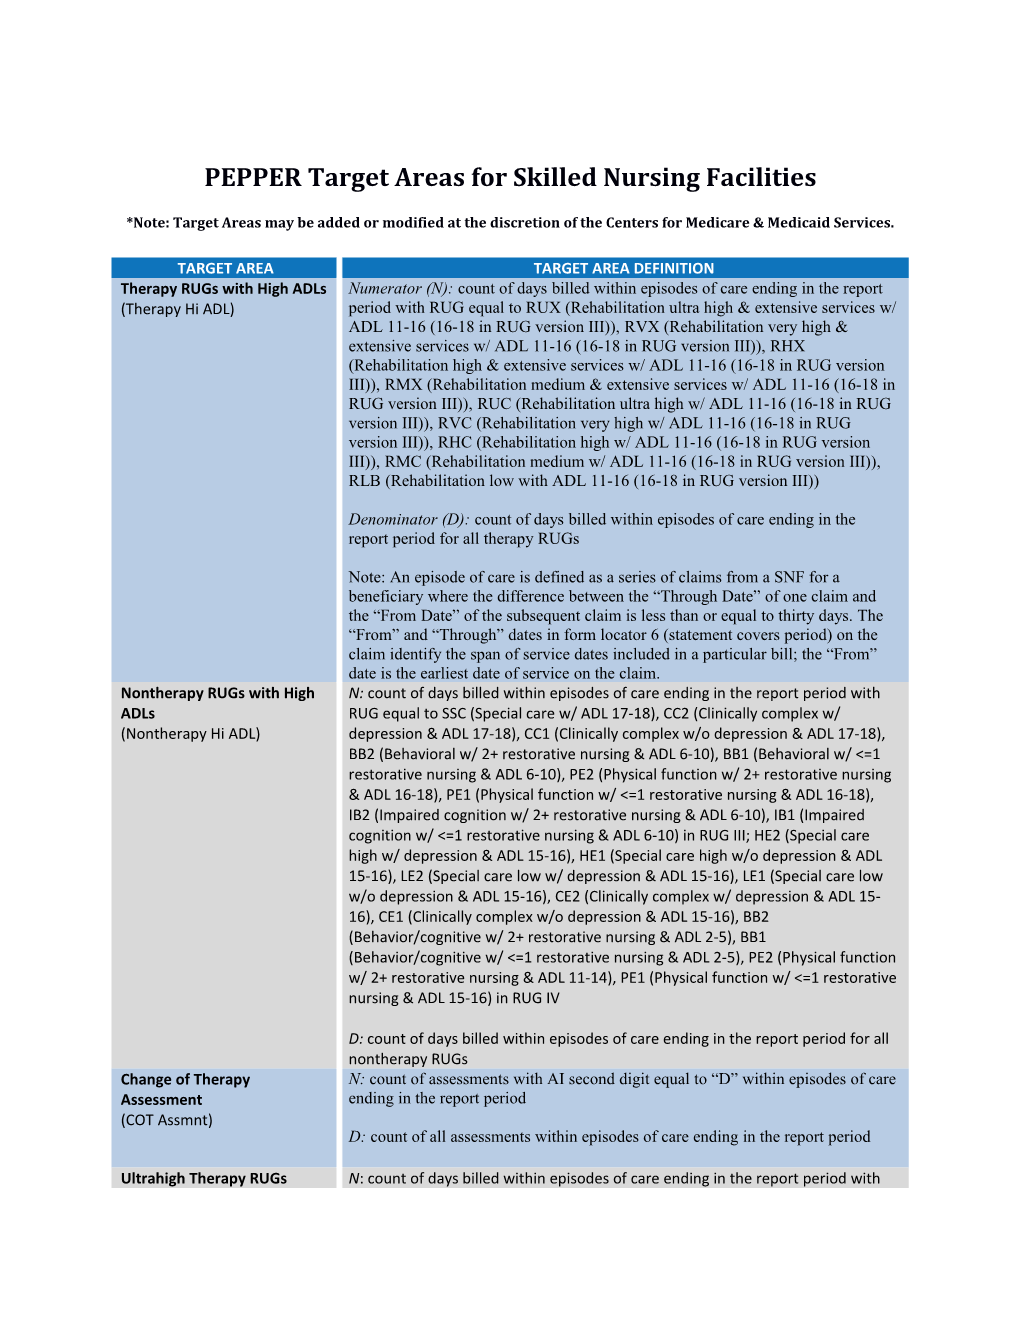 PEPPER Target Areas for Skilled Nursing Facilities